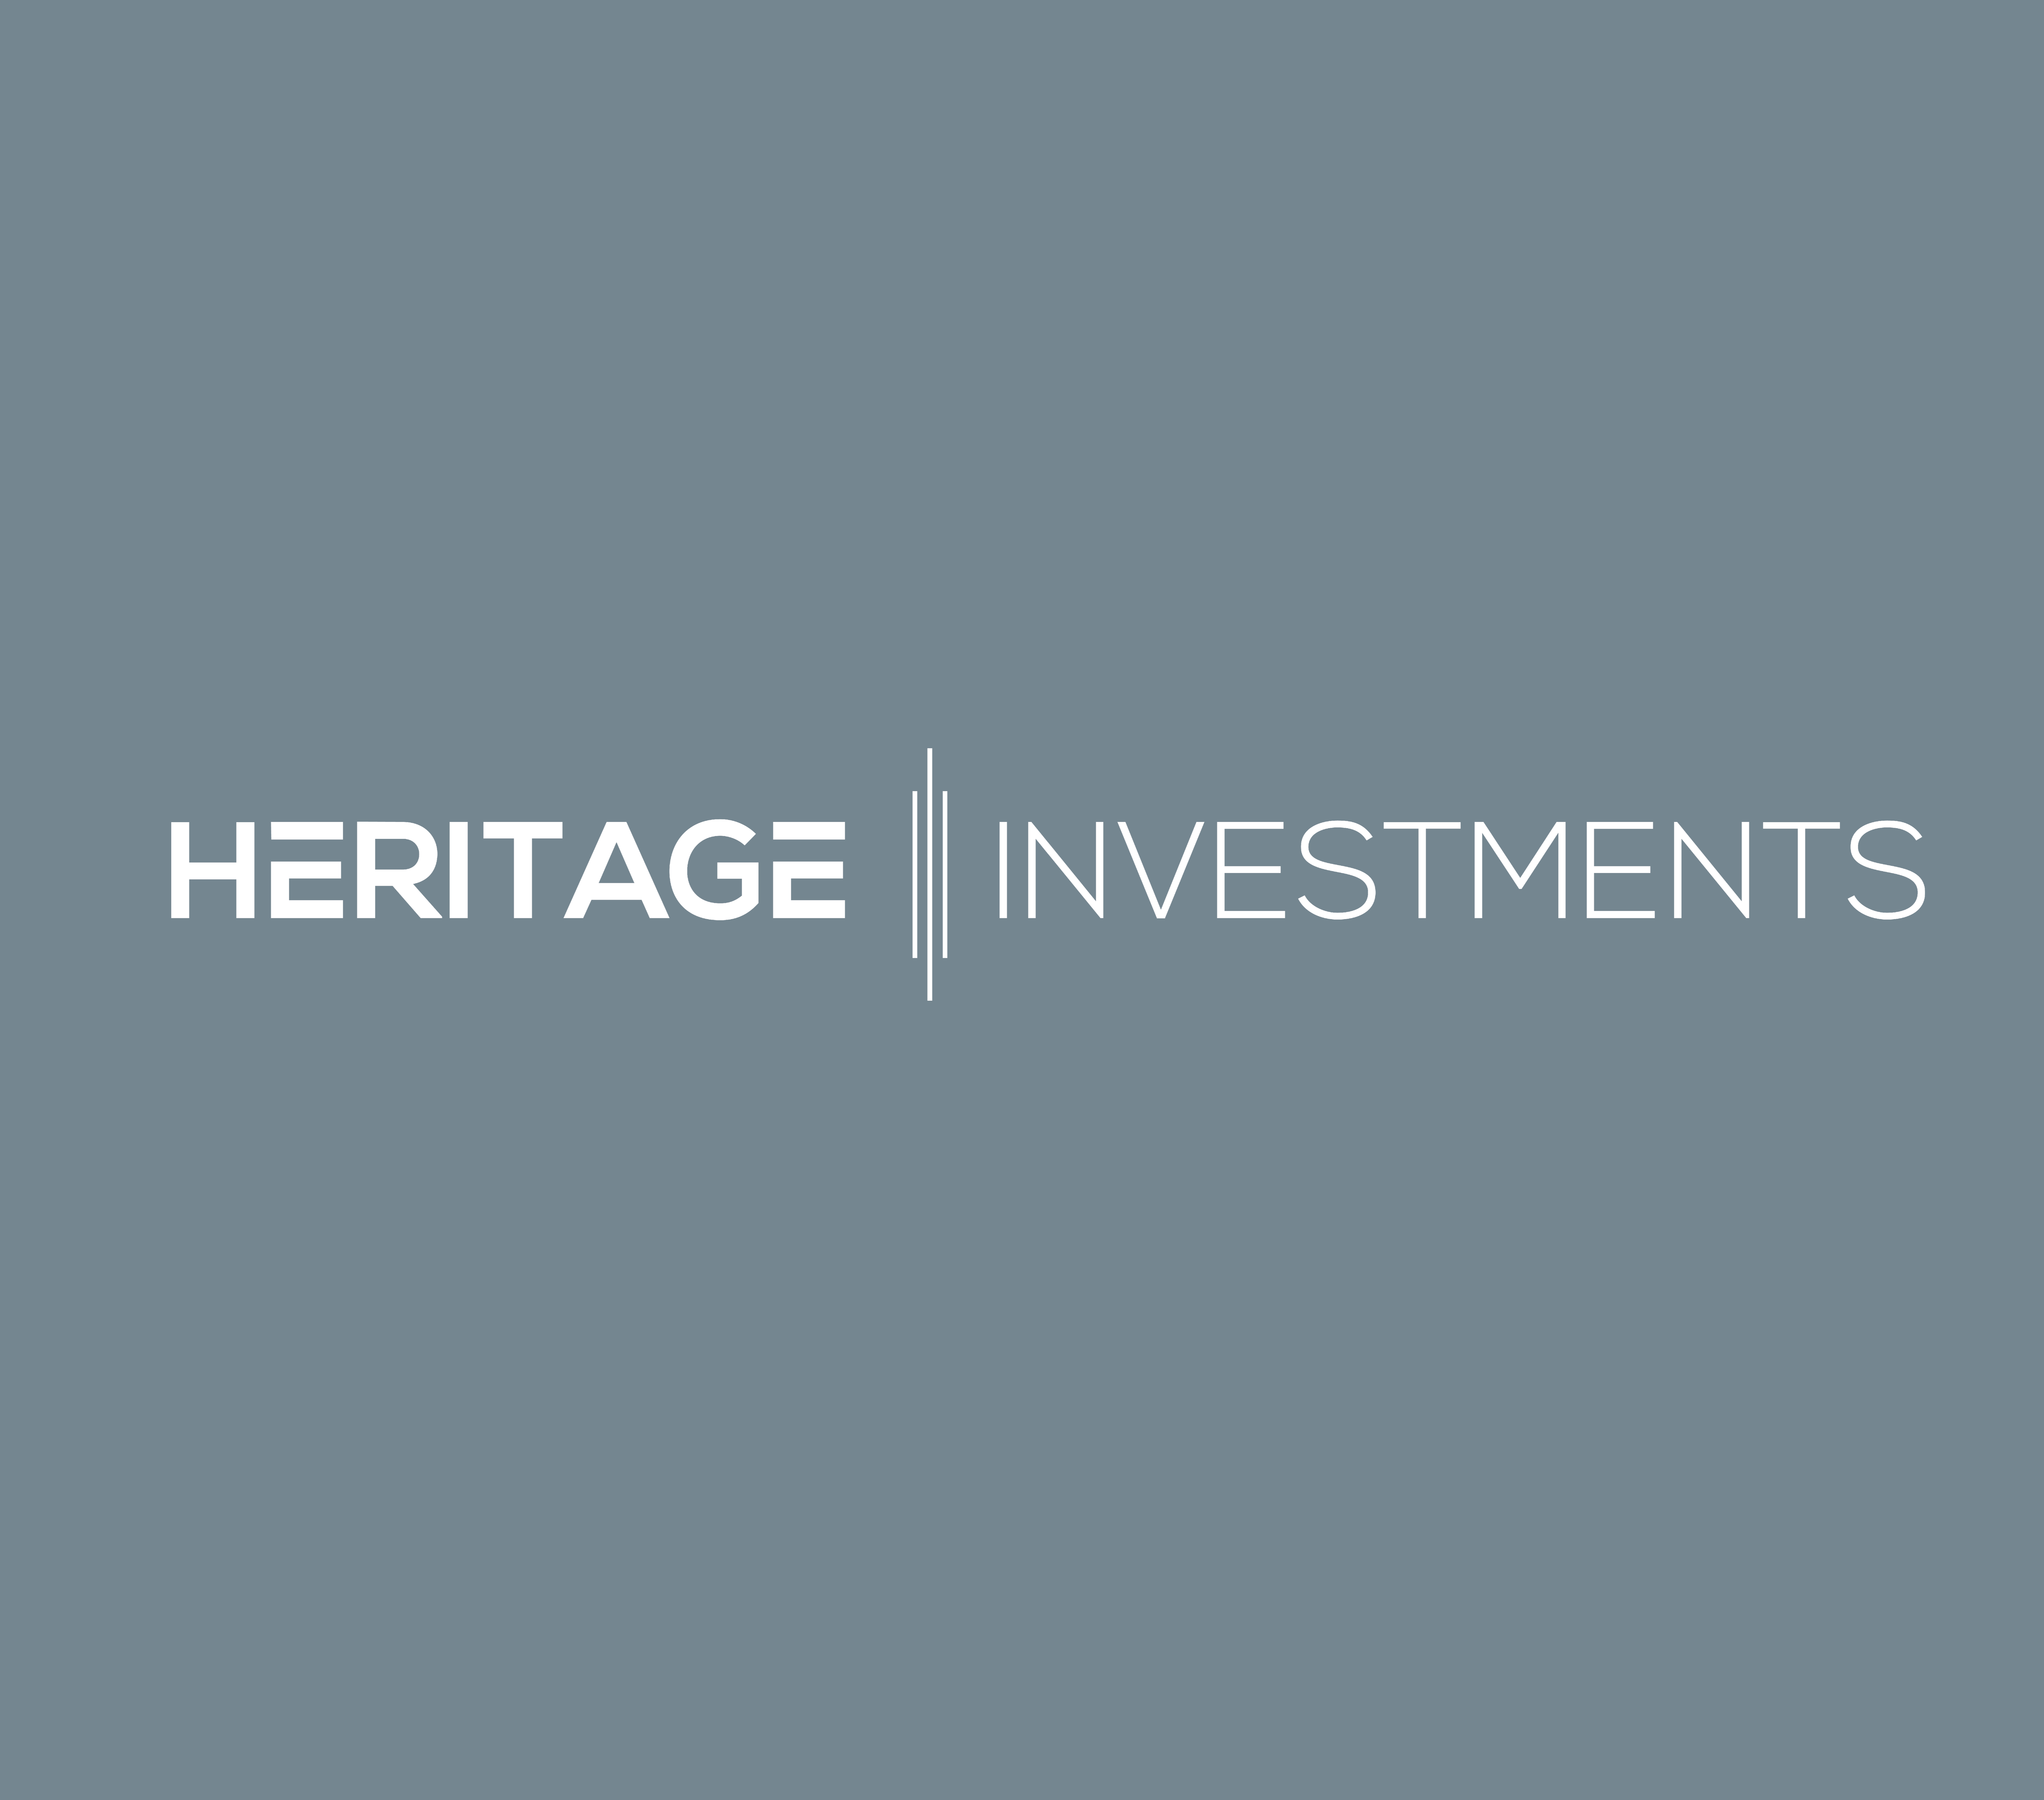 Stage Finance Amsterdam Heritage Investments